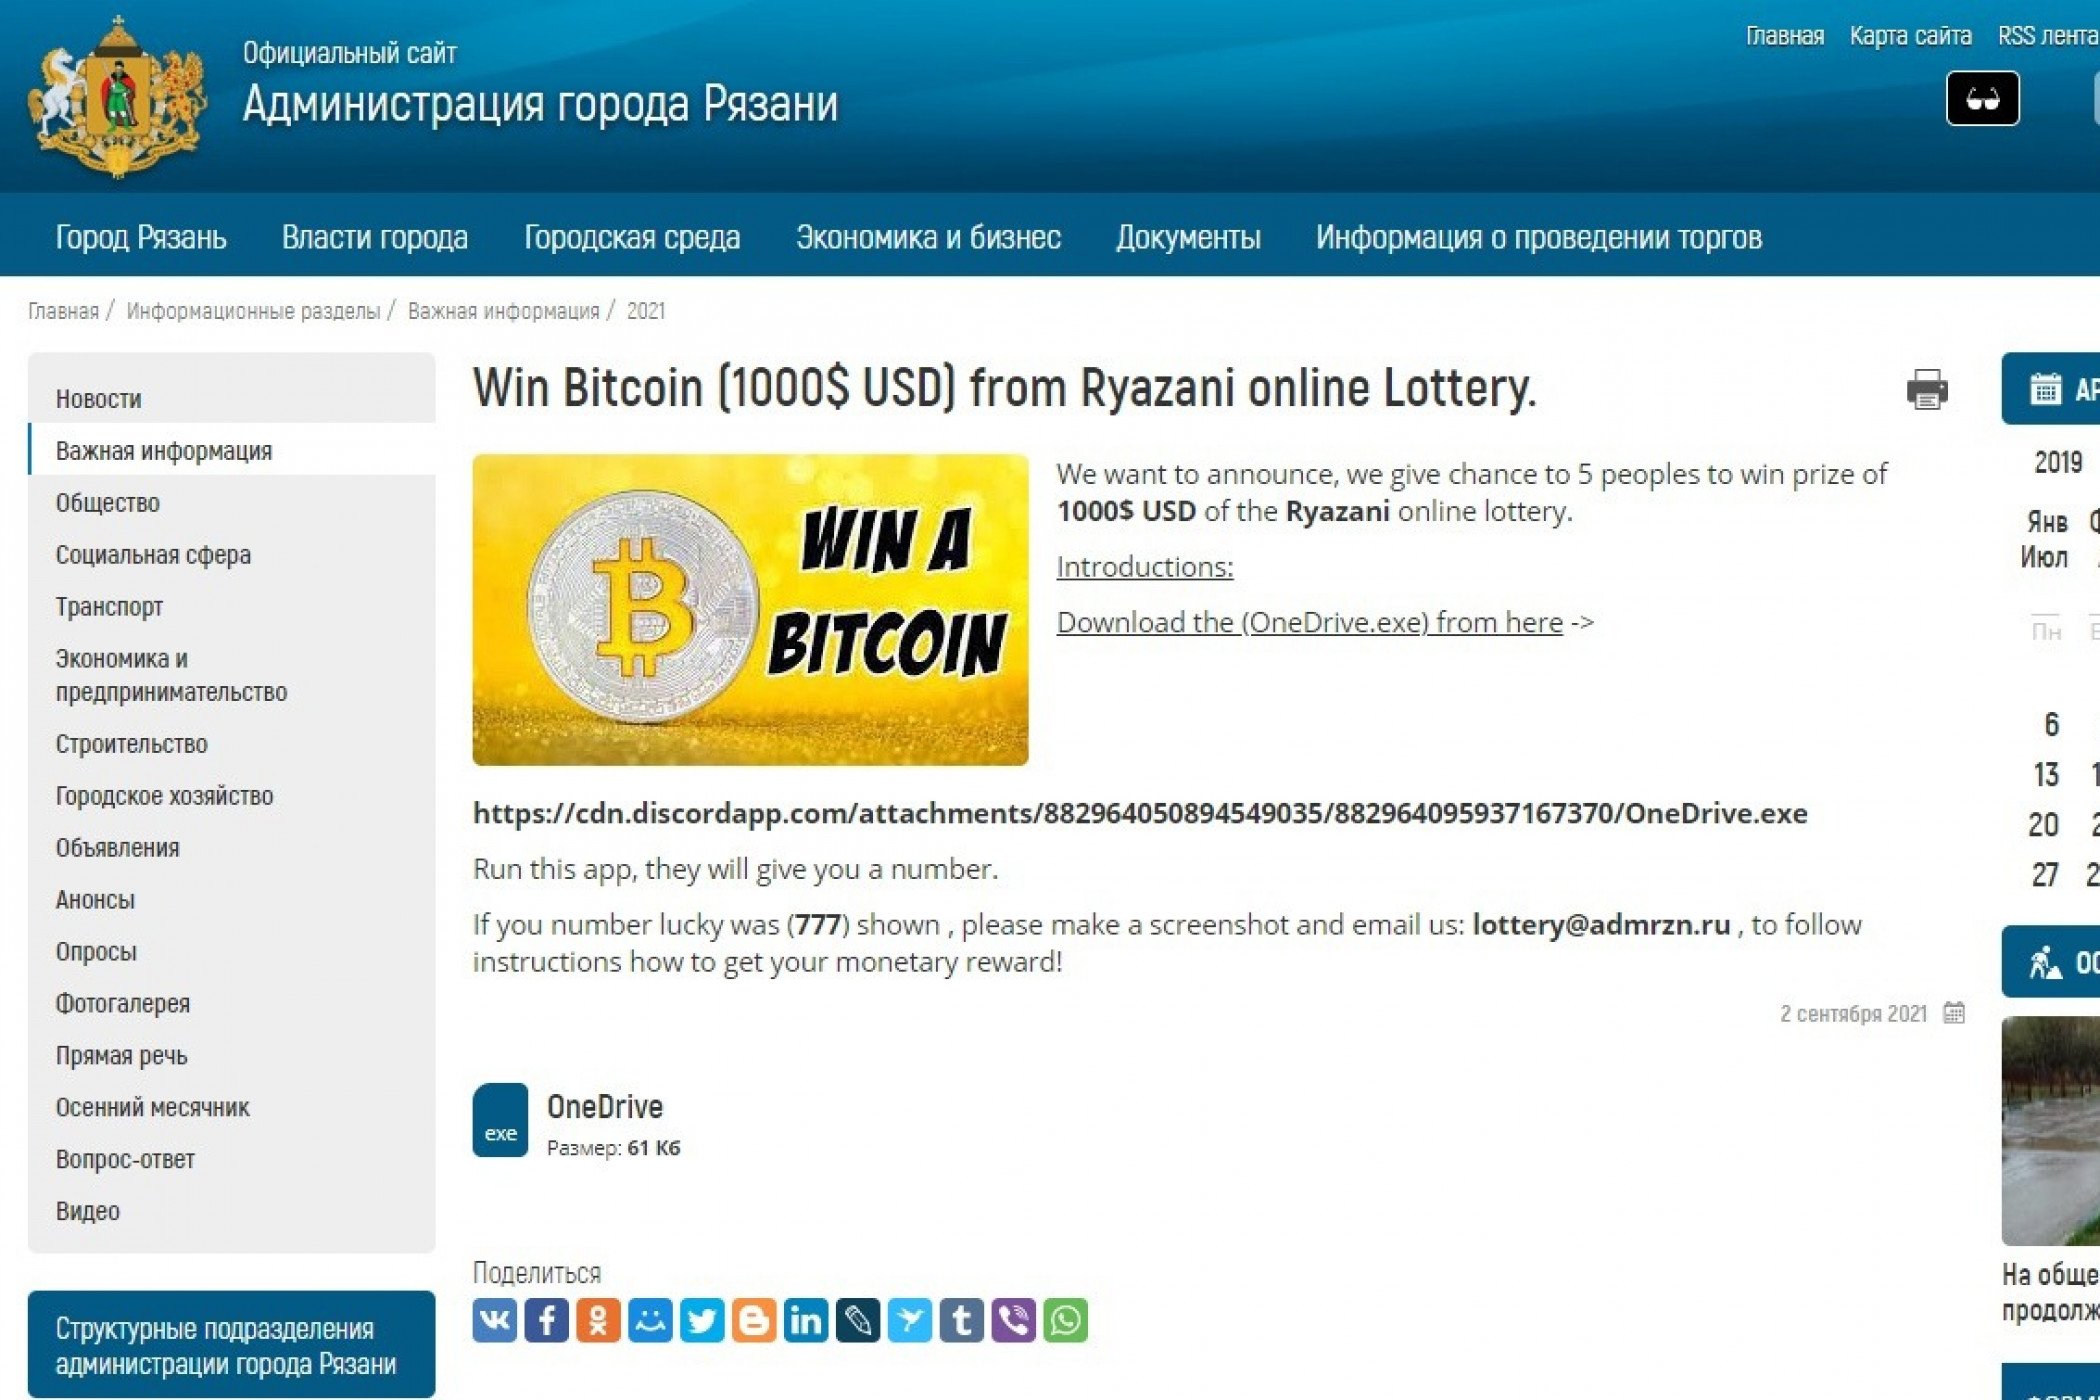 Scammers are offering free bitcoin on hacked government sites in Russia as crypto fraud rises